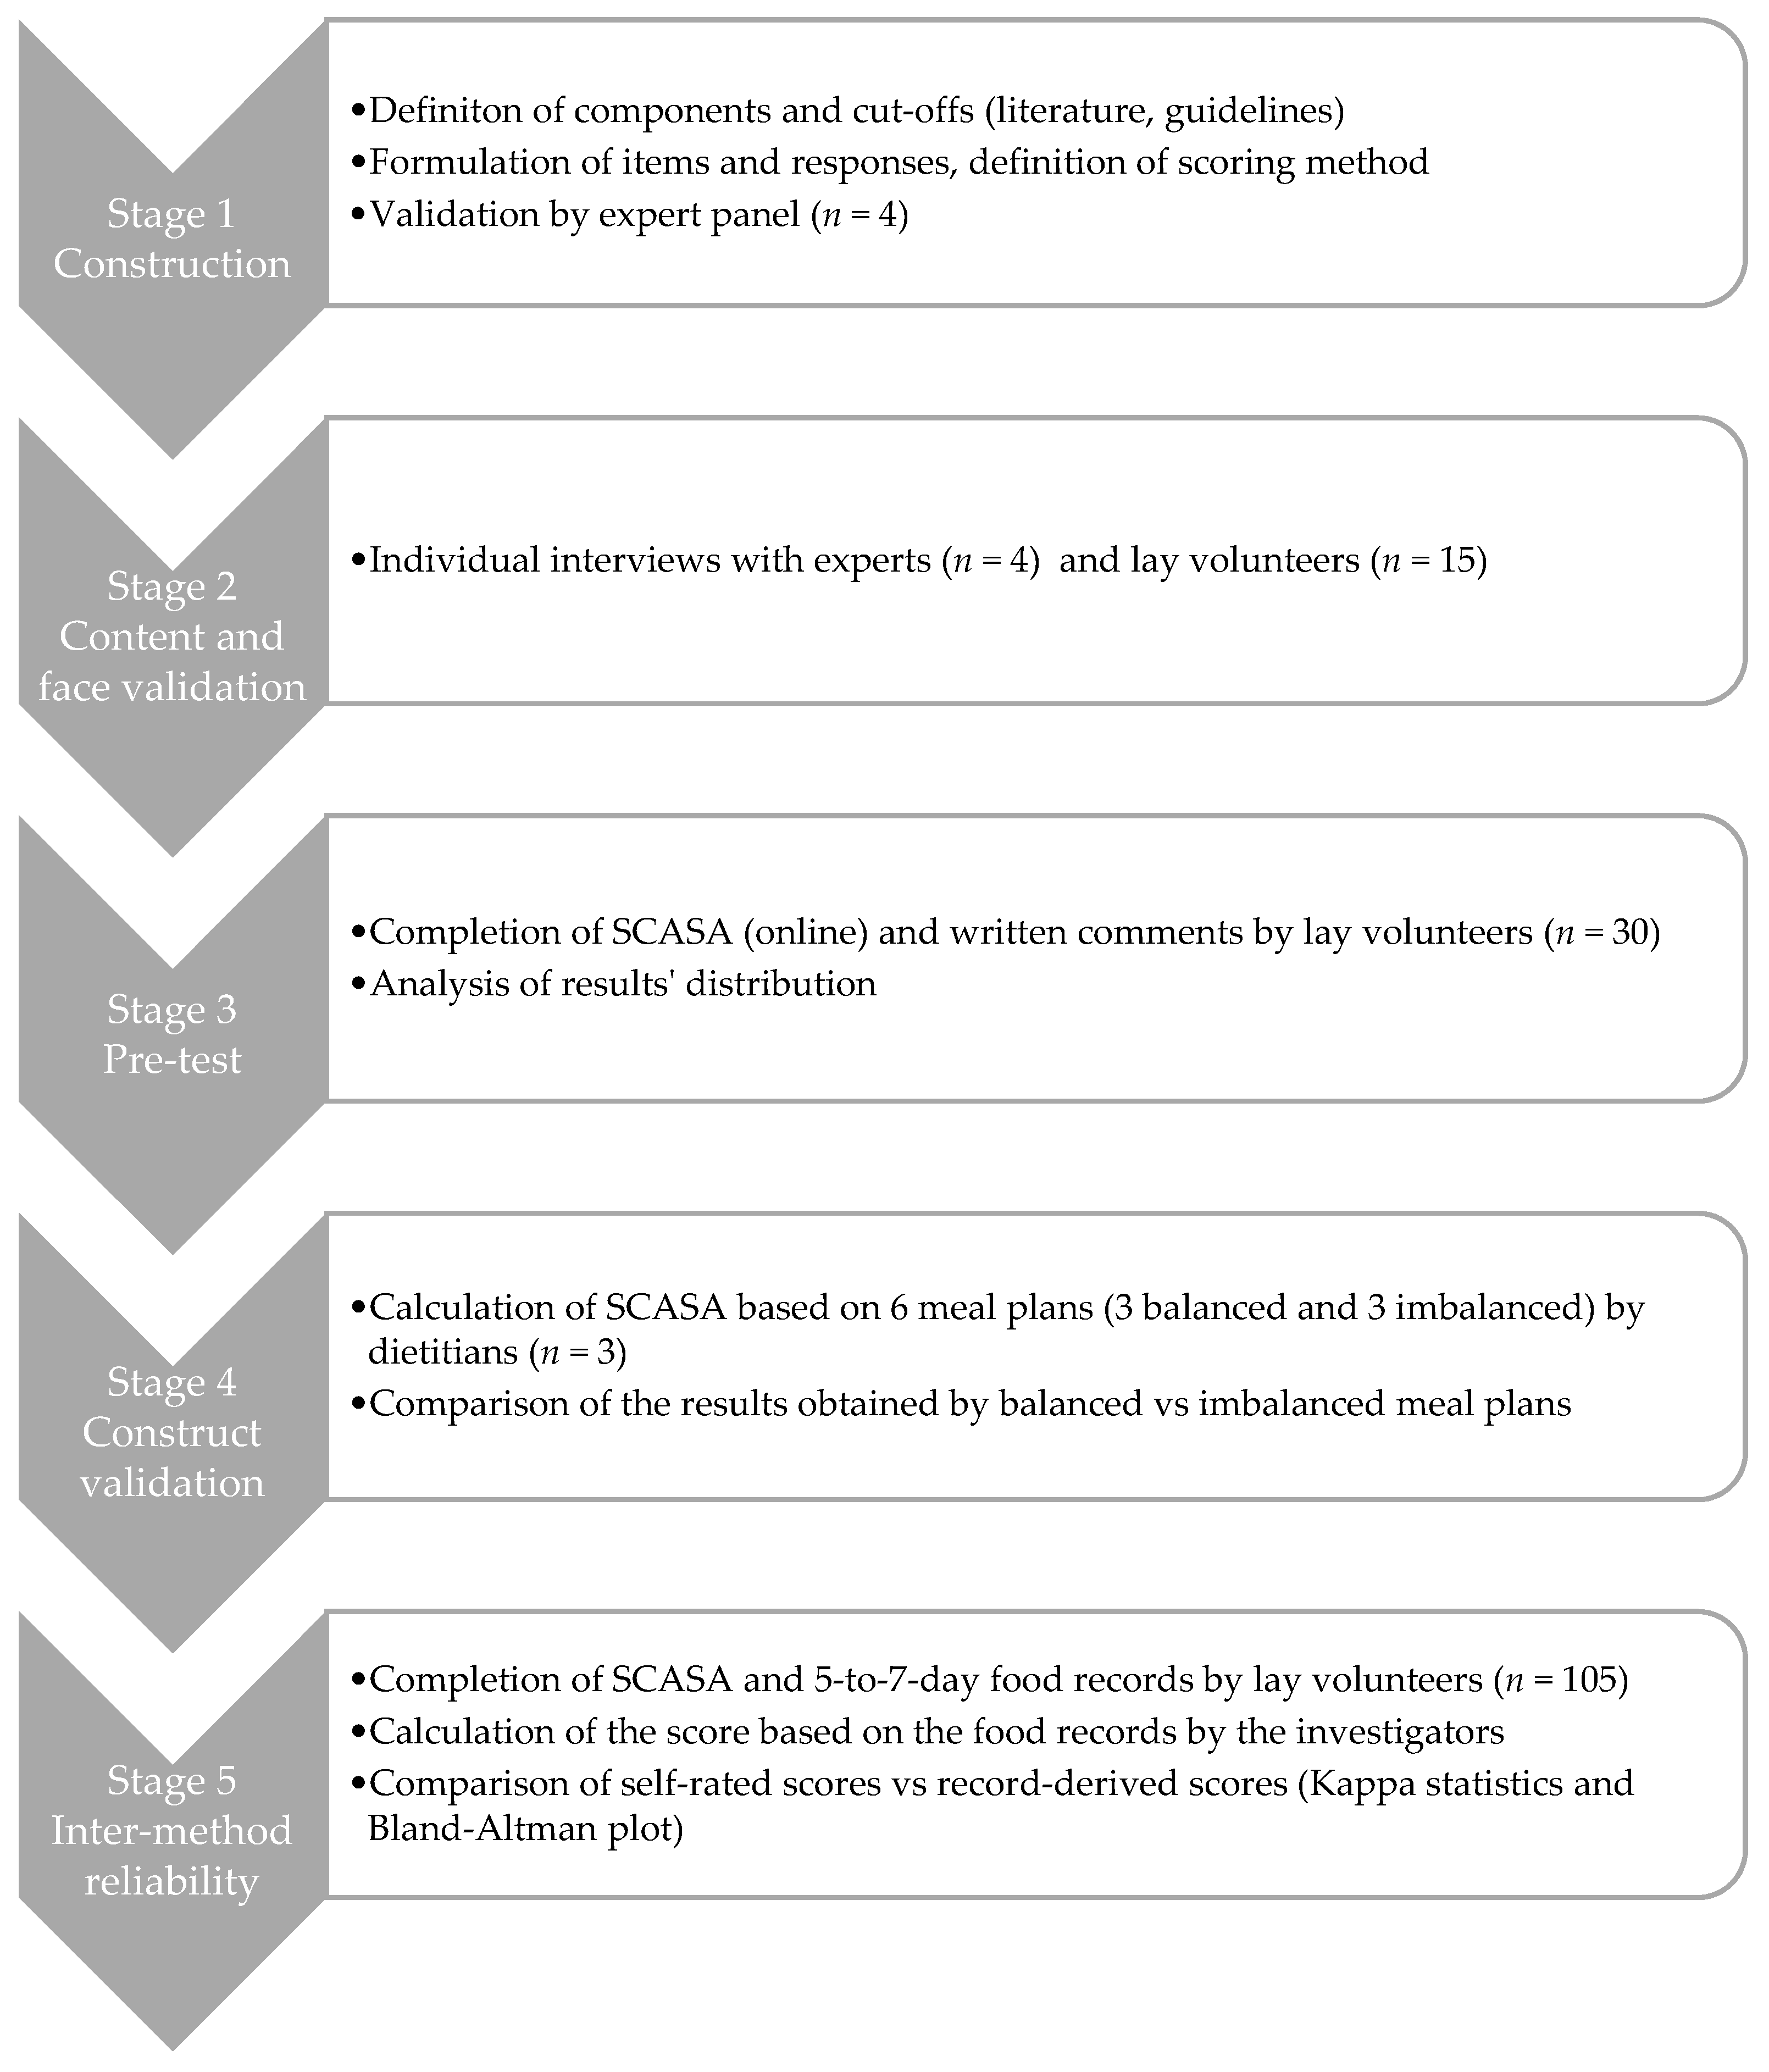 Nutrients | Free Full-Text | Assessing Overall Diet Quality: Development and  Evaluation of the Performance of a Short Self-Administrated Questionnaire  SCASA